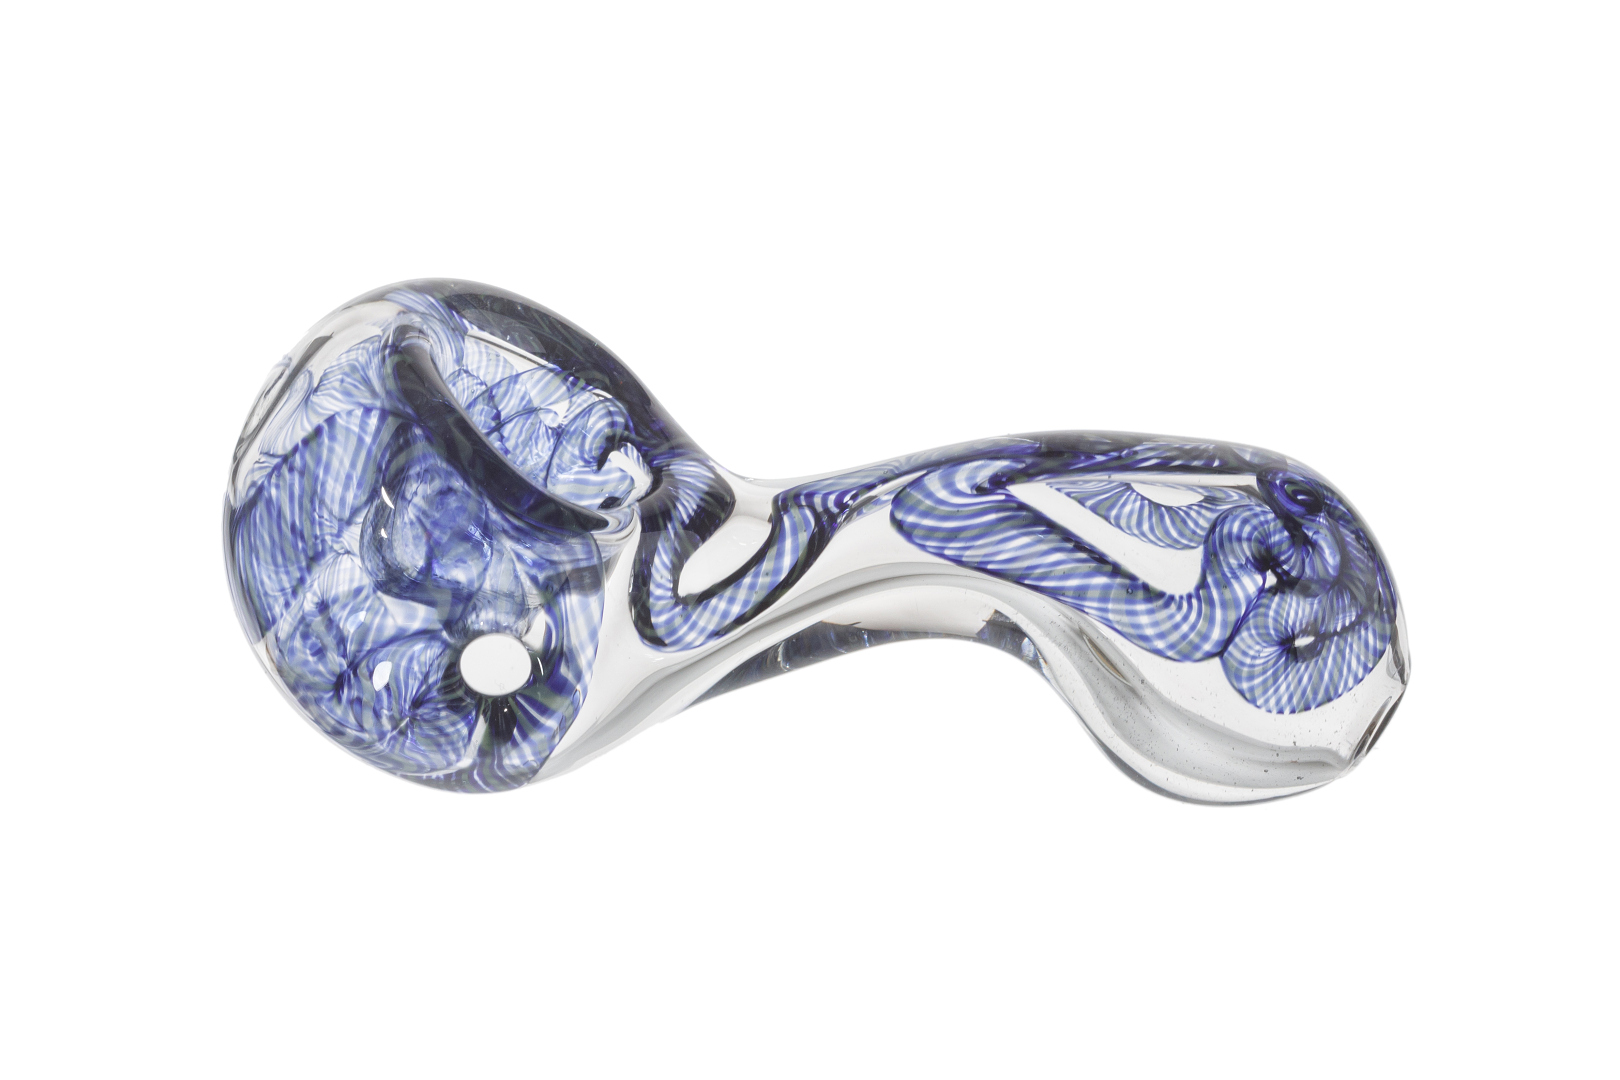 Details about   4.5" Collectible Tobacco Smoking Glass Pipe Bowl Thick Glass Hand Pipes P124D 